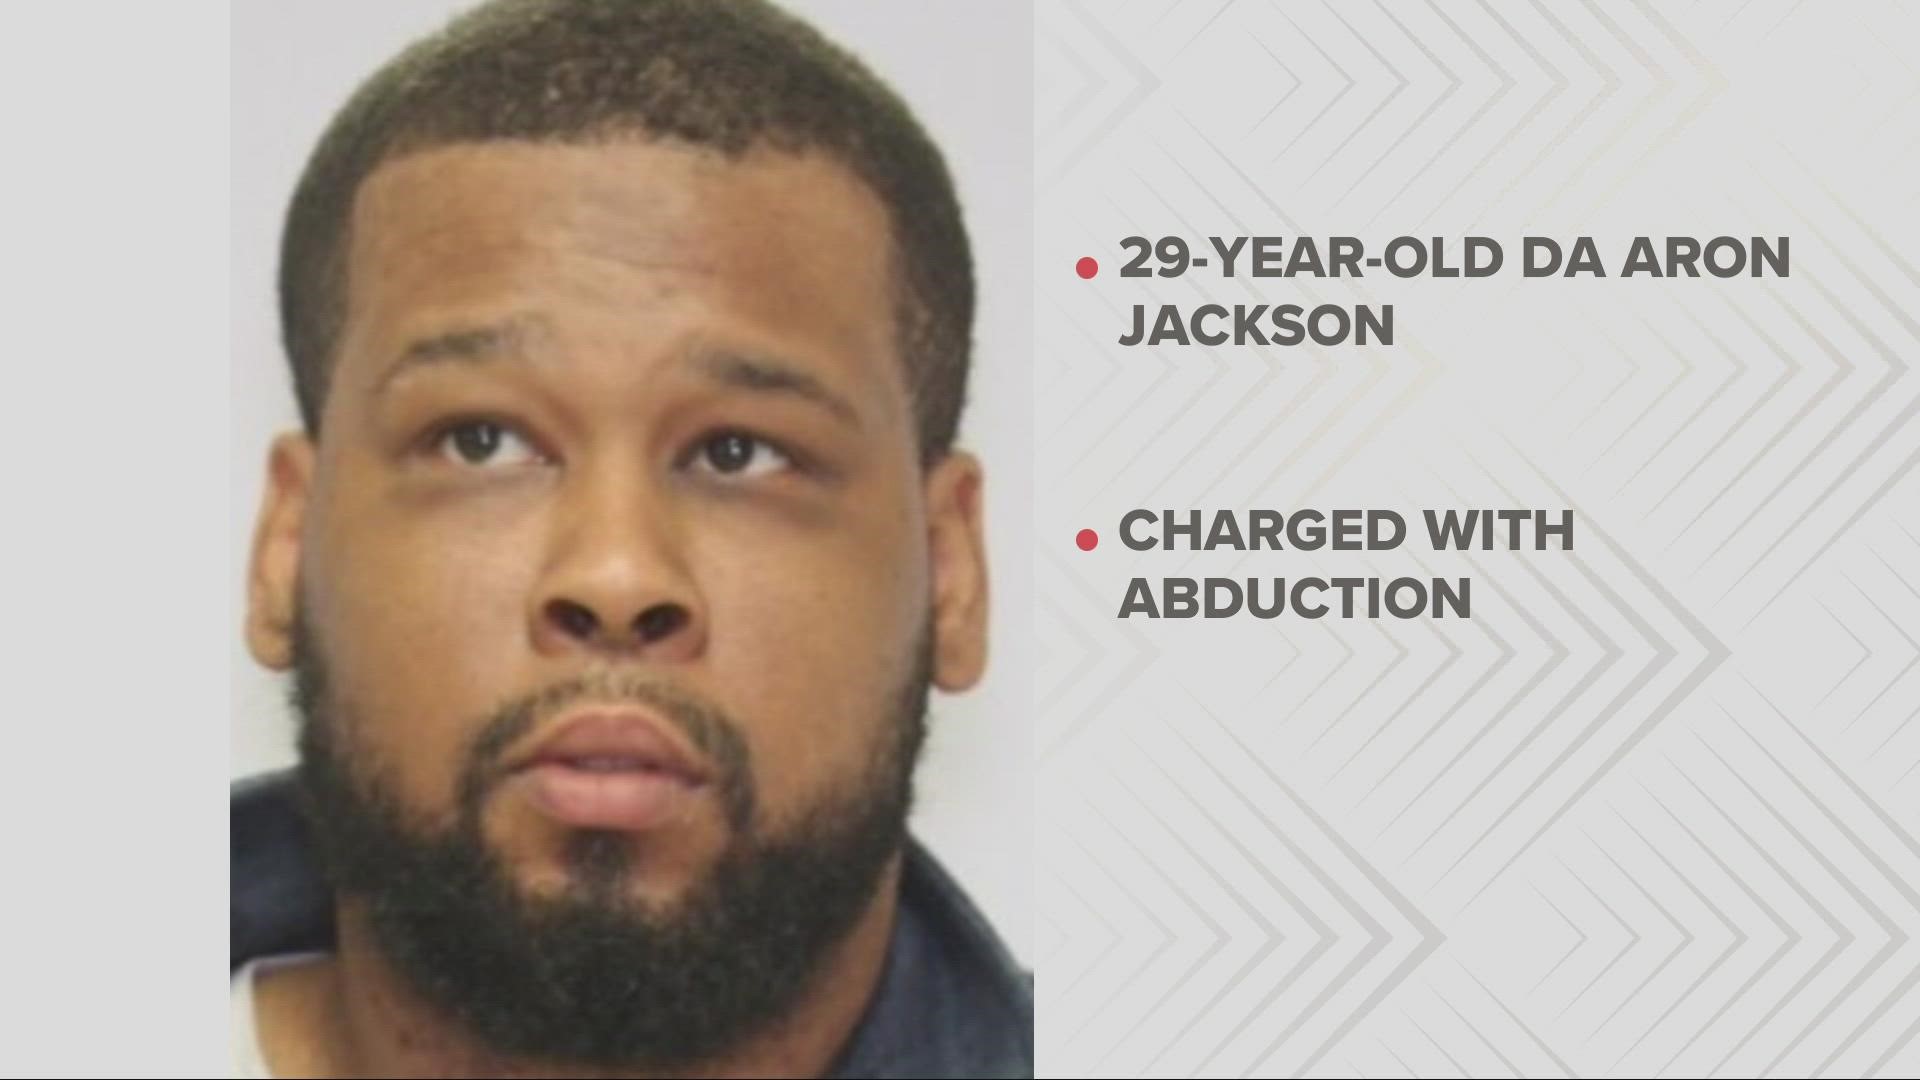 29-year-old Da Aron Jackson has been arrested and charged with abduction. He was booked into the Summit County Jail.